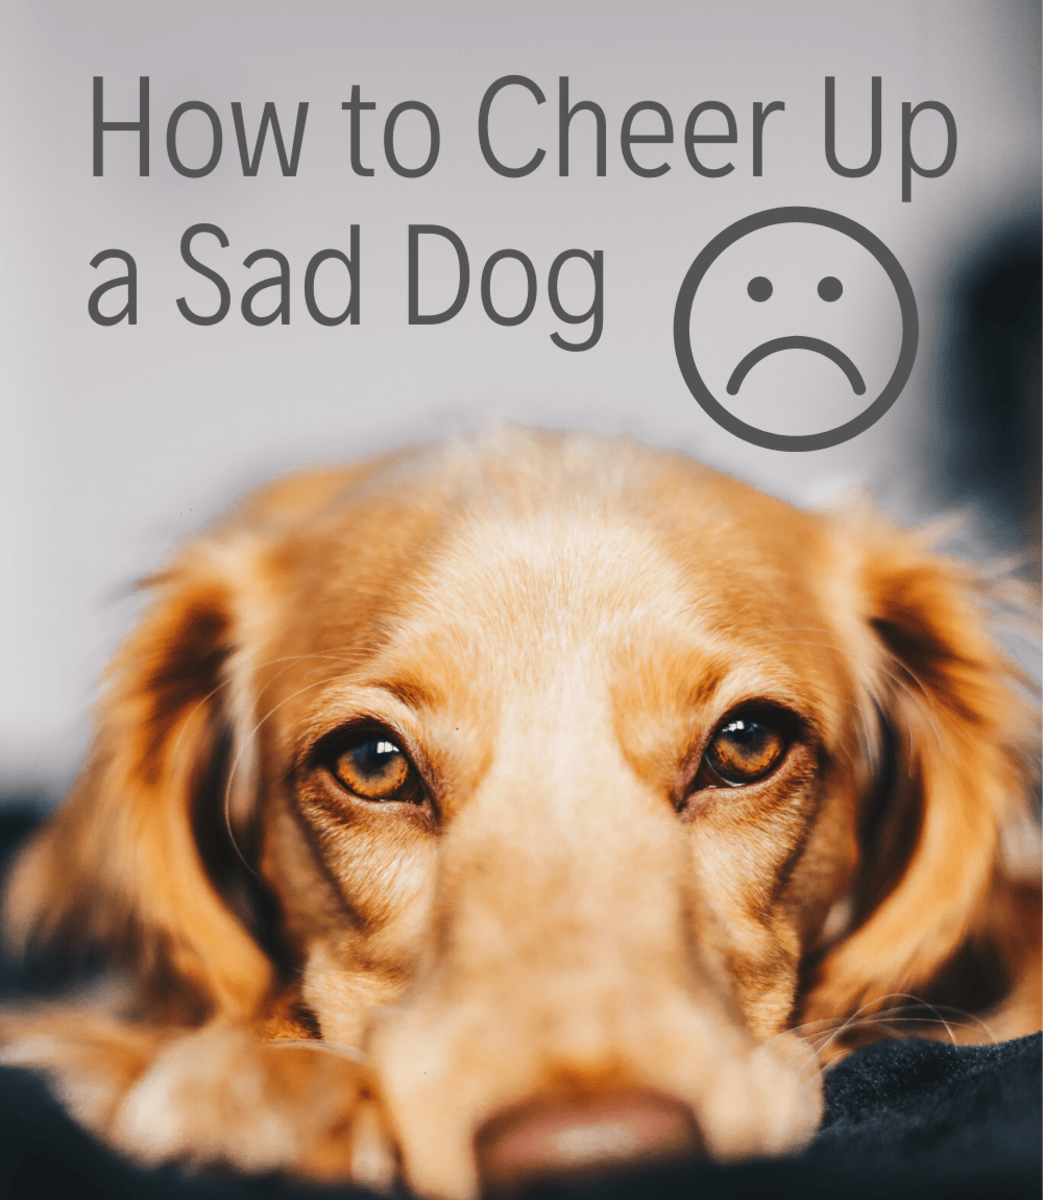 7 Best Methods to Cheer Up a Sad or Depressed Dog